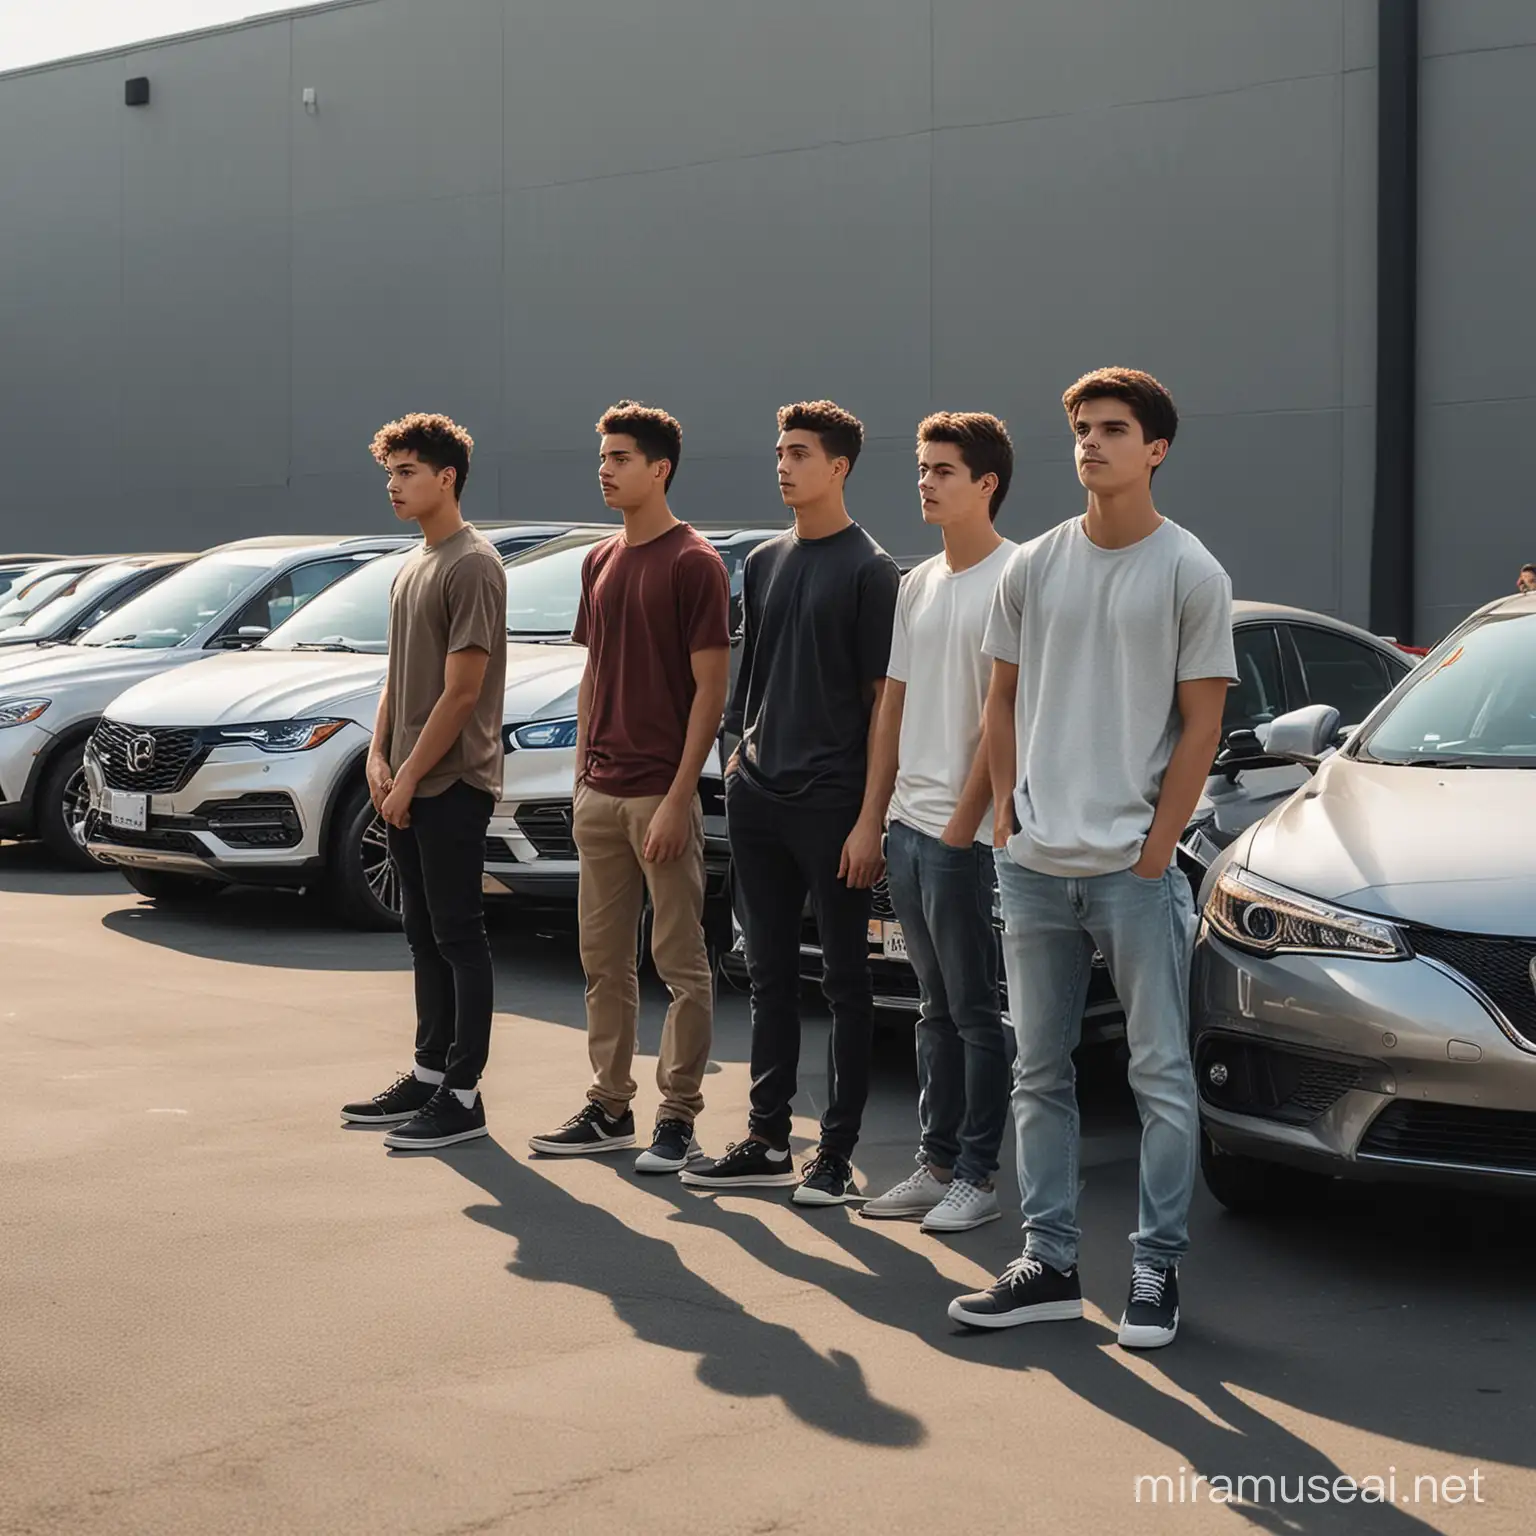 Four Fit Teenage Boys Admiring Four Brand New Cars